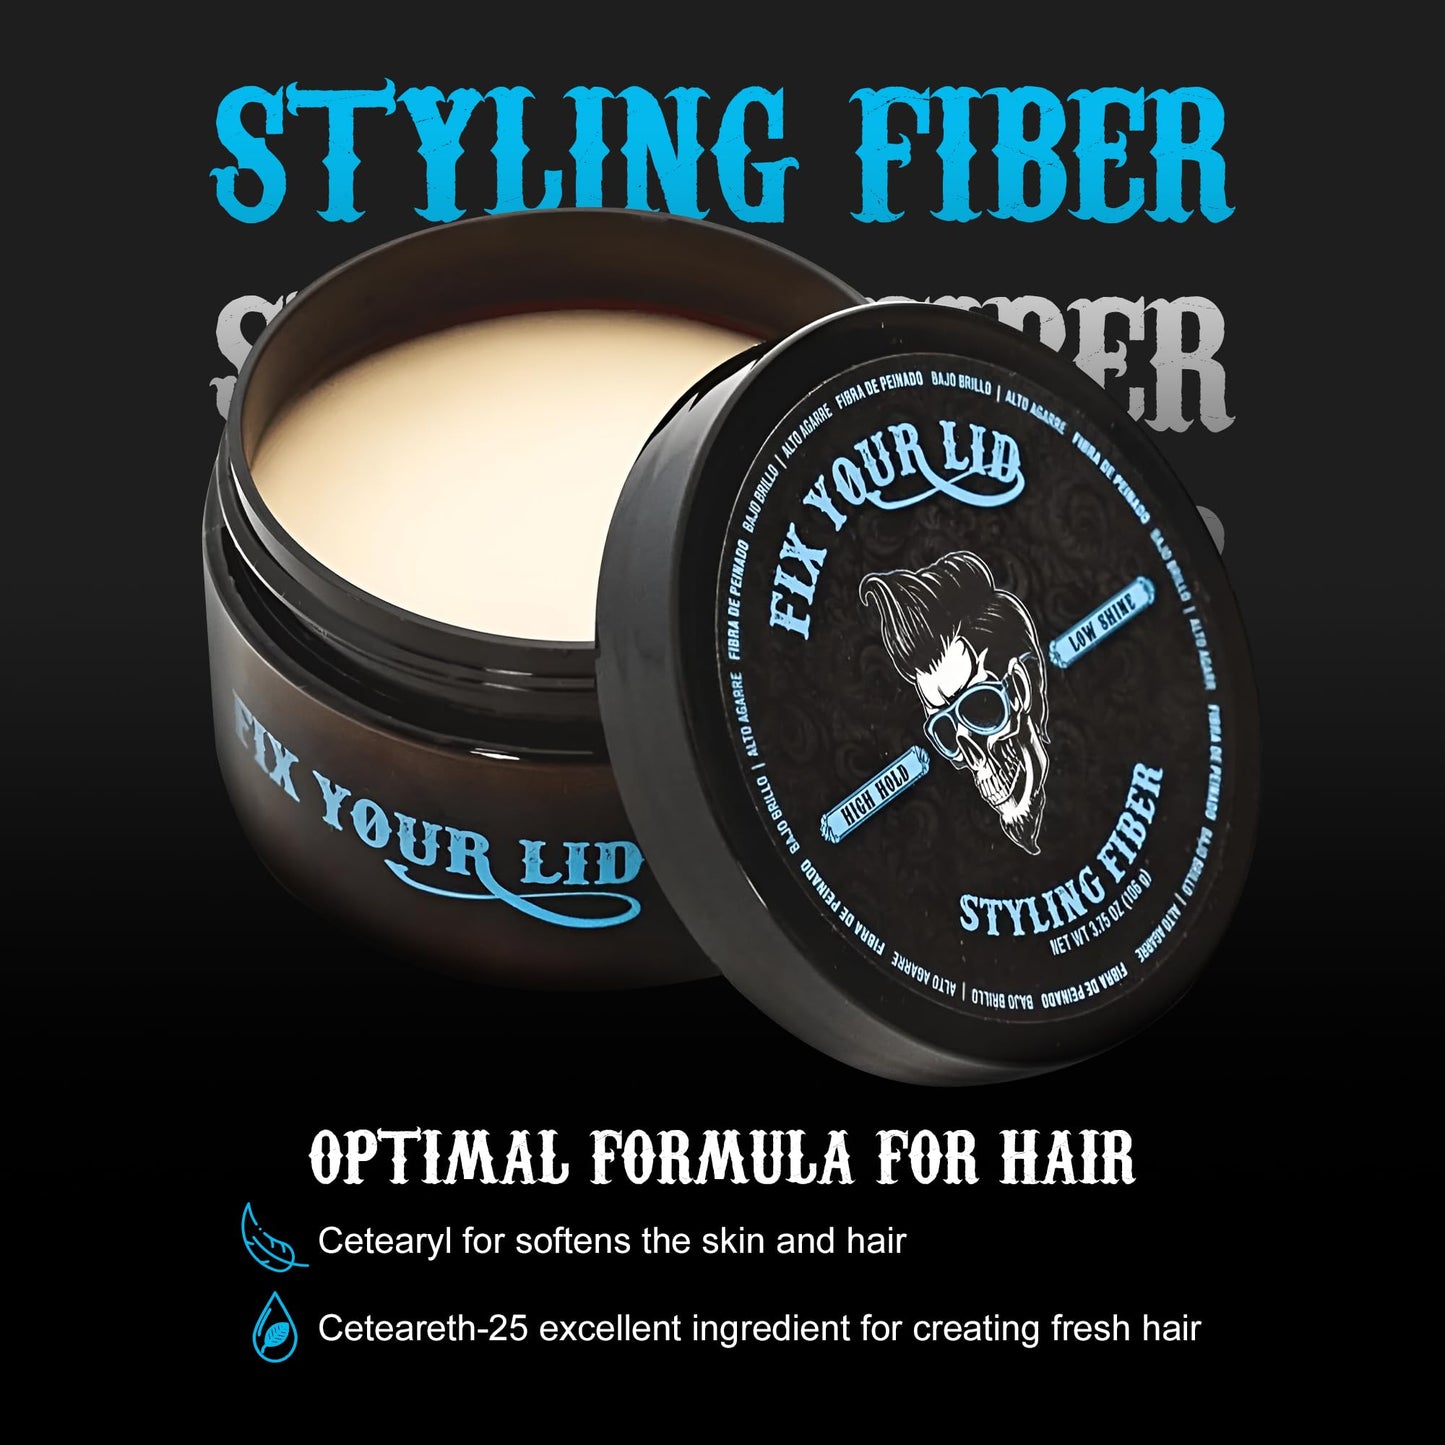 Fix Your Lid Styling Fiber for Men's Hair – High Hold and Low Shine with Matte Finish – Hair Fiber for all Mens Hair Types & Styles - Easy To Wash Out - 3.75 Oz